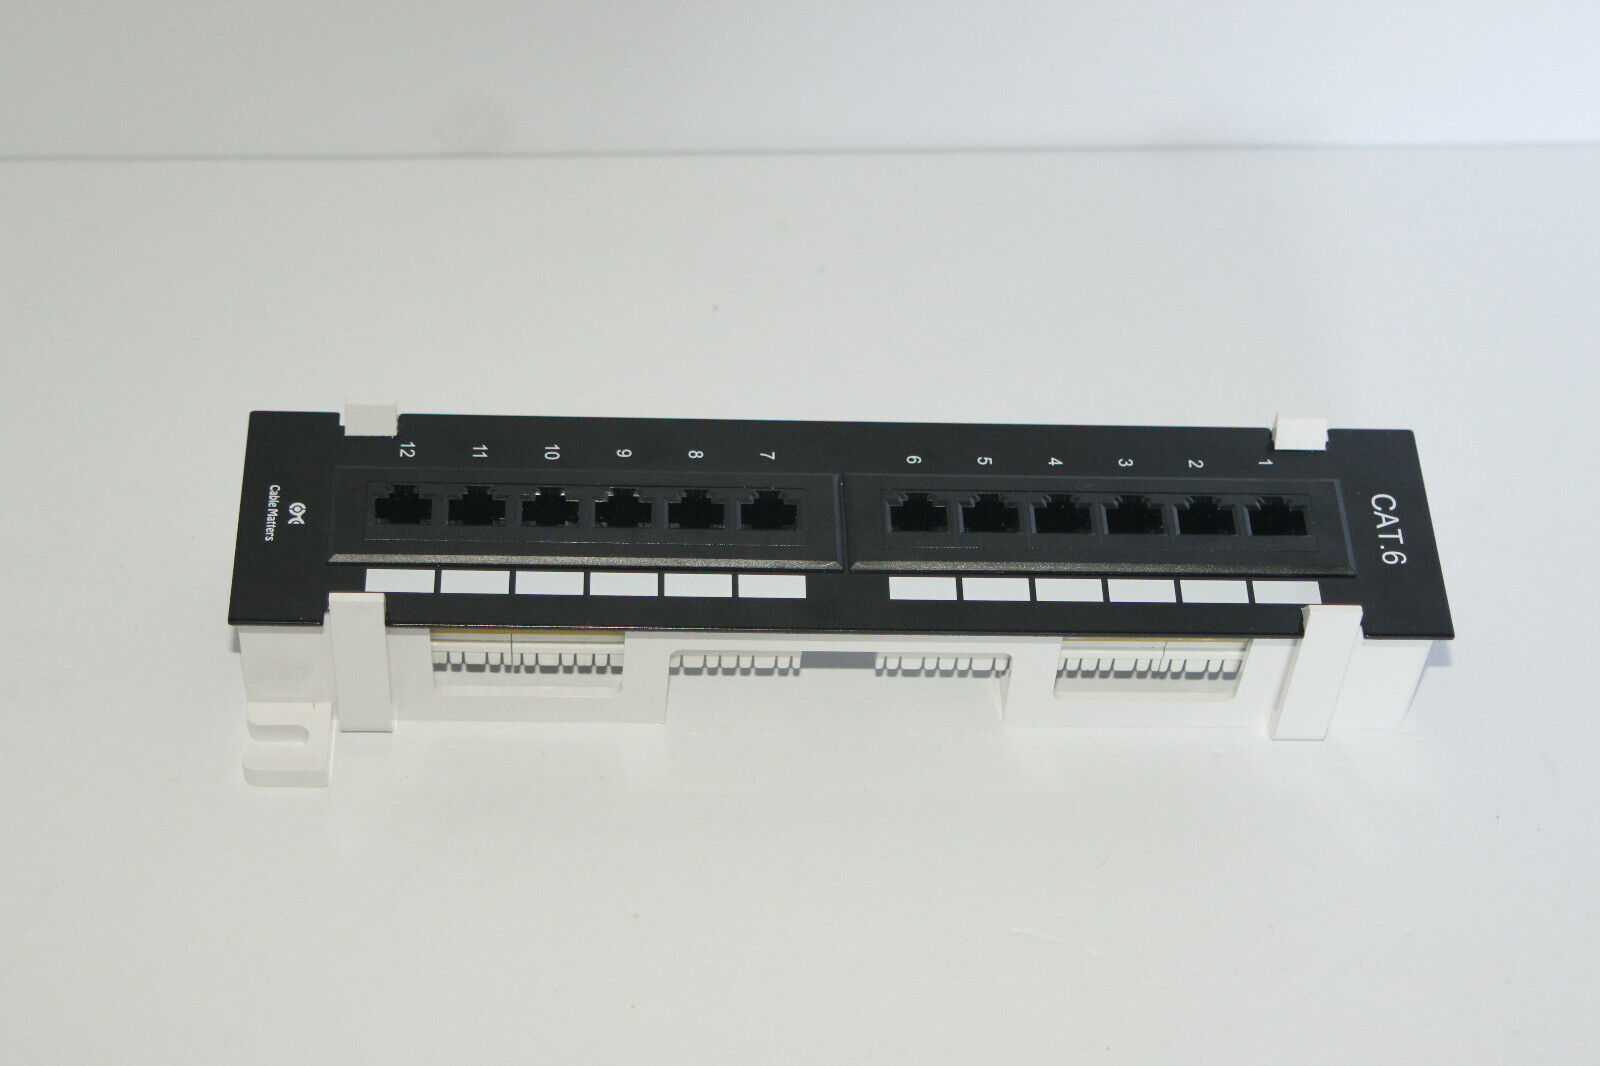 Cable Matters UL Listed Mini 12 Port Vertical Patch Panel W/ 89D Bracket 10 Giga